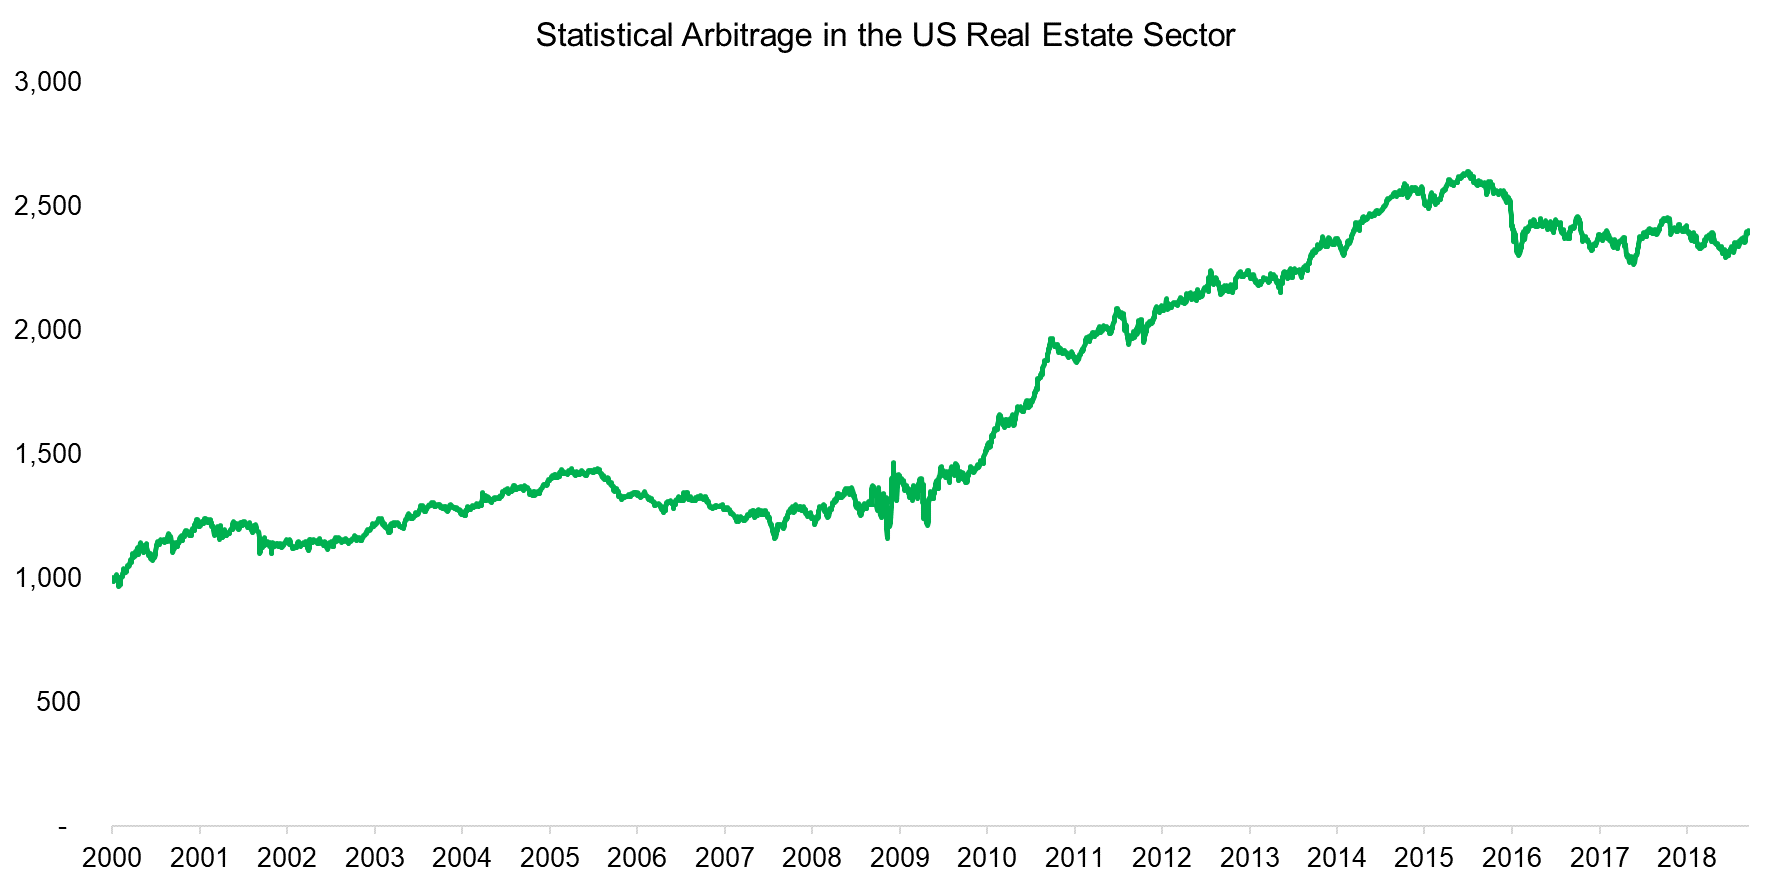 Statistical Arbitrage in the US Real Estate Sector